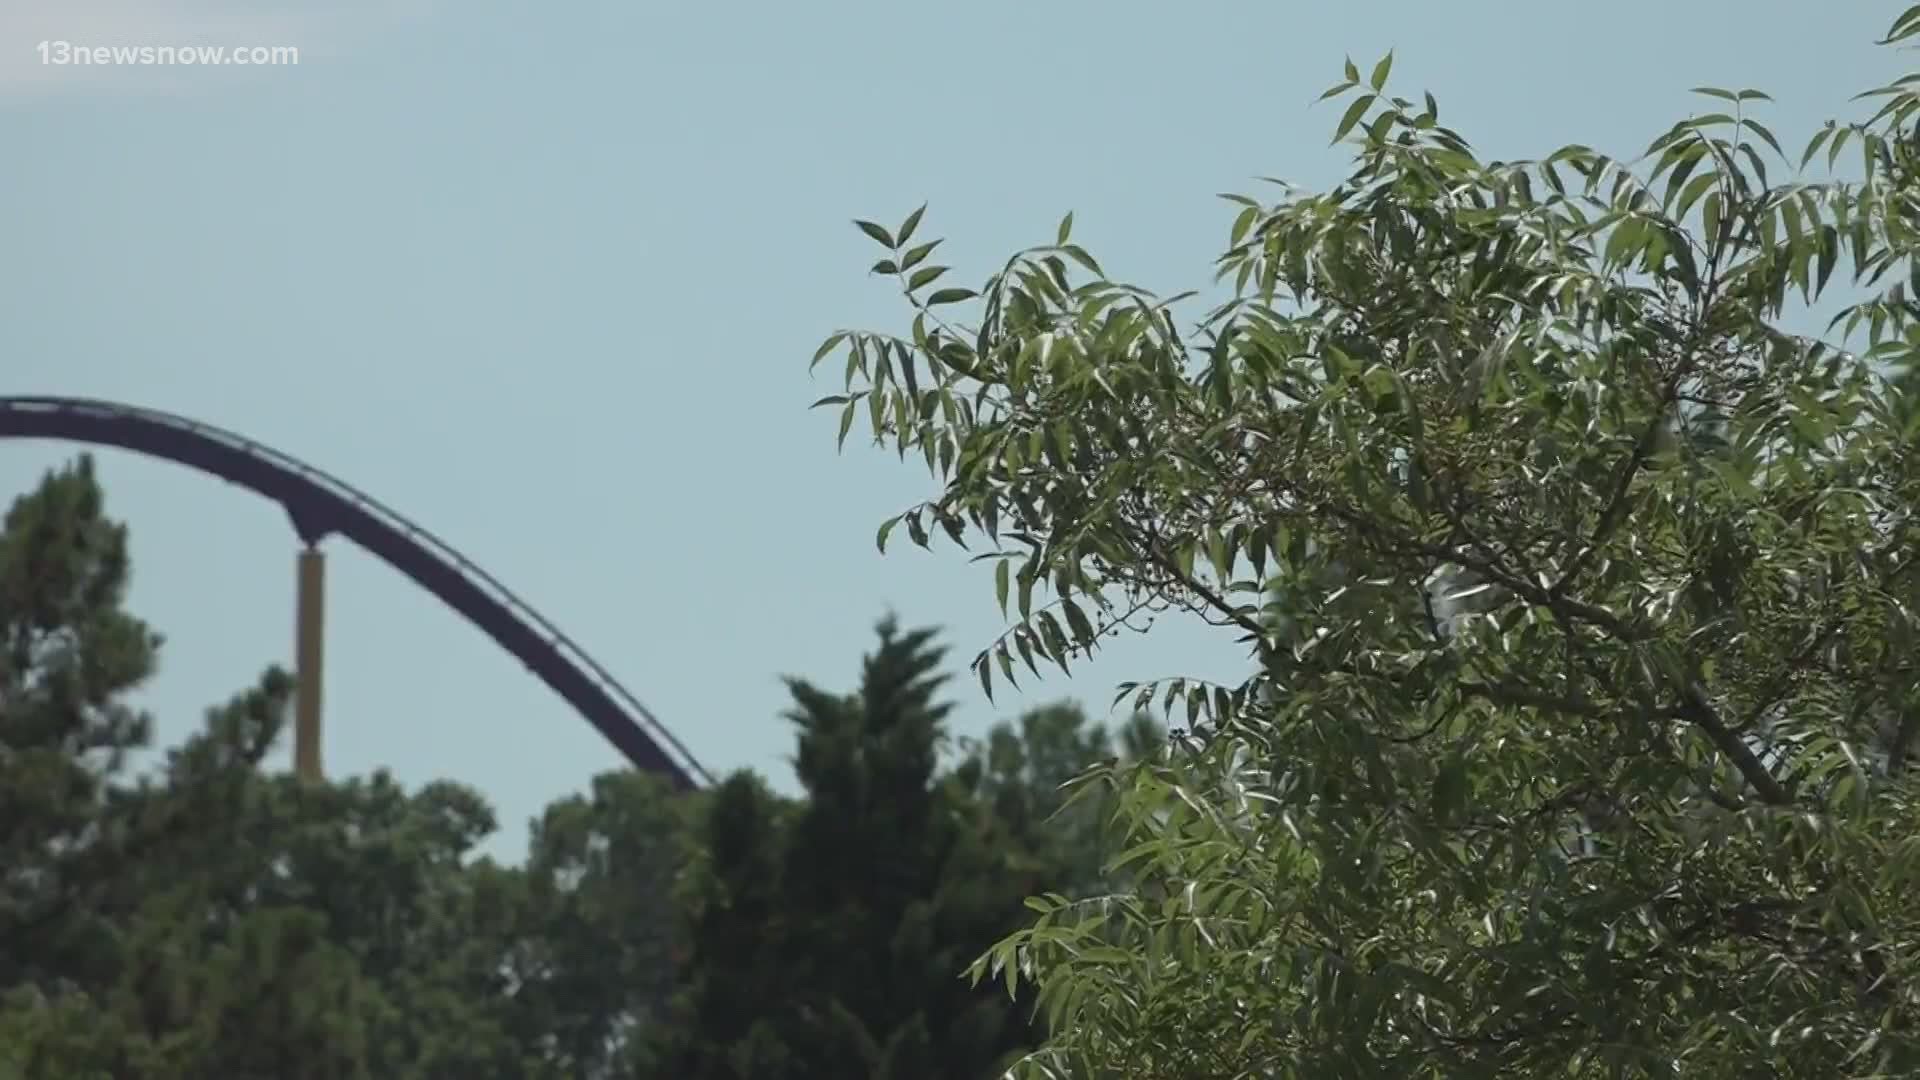 Busch Gardens Williamsburg remains closed at the height of tourist season. Businesses in that area are already feeling the impact and the county is also taking a hit